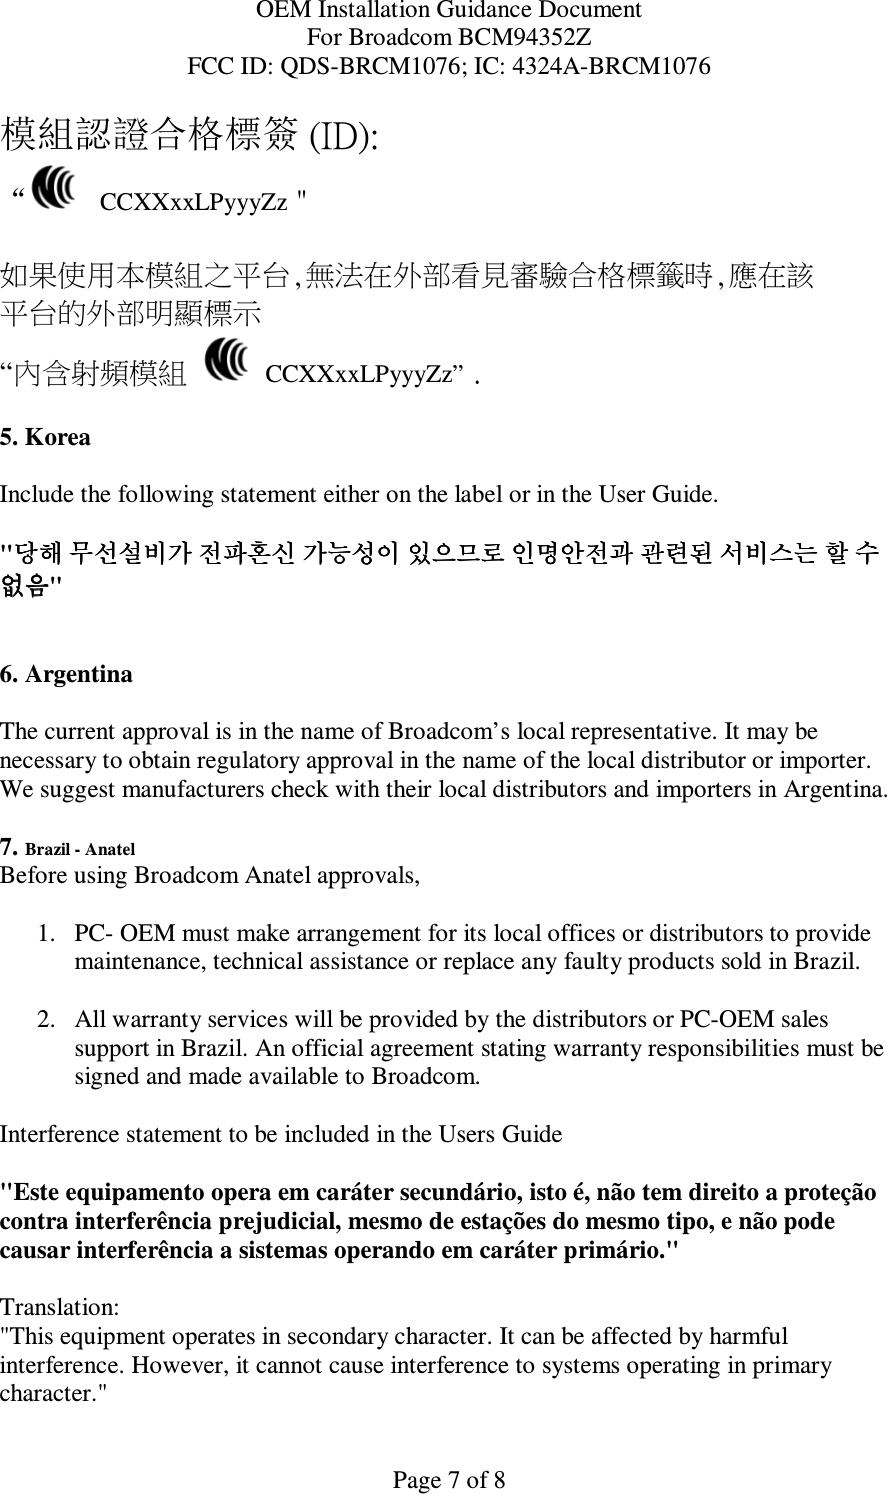 OEM Installation Guidance Document For Broadcom BCM94352Z FCC ID: QDS-BRCM1076; IC: 4324A-BRCM1076  Page 7 of 8 模組認證合格標簽 (ID): “   CCXXxxLPyyyZz＂  如果使用本模組之平台,無法在外部看見審驗合格標籤時,應在該 平台的外部明顯標示 “內含射頻模組   CCXXxxLPyyyZz” .  5. Korea  Include the following statement either on the label or in the User Guide.   &quot;당해당해당해당해 무선설비가무선설비가무선설비가무선설비가 전파혼신전파혼신전파혼신전파혼신 가능성이가능성이가능성이가능성이 있으므로있으므로있으므로있으므로 인명안전과인명안전과인명안전과인명안전과 관련된관련된관련된관련된 서비스는서비스는서비스는서비스는 할할할할 수수수수 없없없없음음음음&quot;   6. Argentina   The current approval is in the name of Broadcom’s local representative. It may be necessary to obtain regulatory approval in the name of the local distributor or importer. We suggest manufacturers check with their local distributors and importers in Argentina.  7. Brazil - Anatel  Before using Broadcom Anatel approvals,   1. PC- OEM must make arrangement for its local offices or distributors to provide maintenance, technical assistance or replace any faulty products sold in Brazil.   2. All warranty services will be provided by the distributors or PC-OEM sales support in Brazil. An official agreement stating warranty responsibilities must be signed and made available to Broadcom.   Interference statement to be included in the Users Guide &quot;Este equipamento opera em caráter secundário, isto é, não tem direito a proteção contra interferência prejudicial, mesmo de estações do mesmo tipo, e não pode causar interferência a sistemas operando em caráter primário.&quot; Translation:  &quot;This equipment operates in secondary character. It can be affected by harmful interference. However, it cannot cause interference to systems operating in primary character.&quot;  